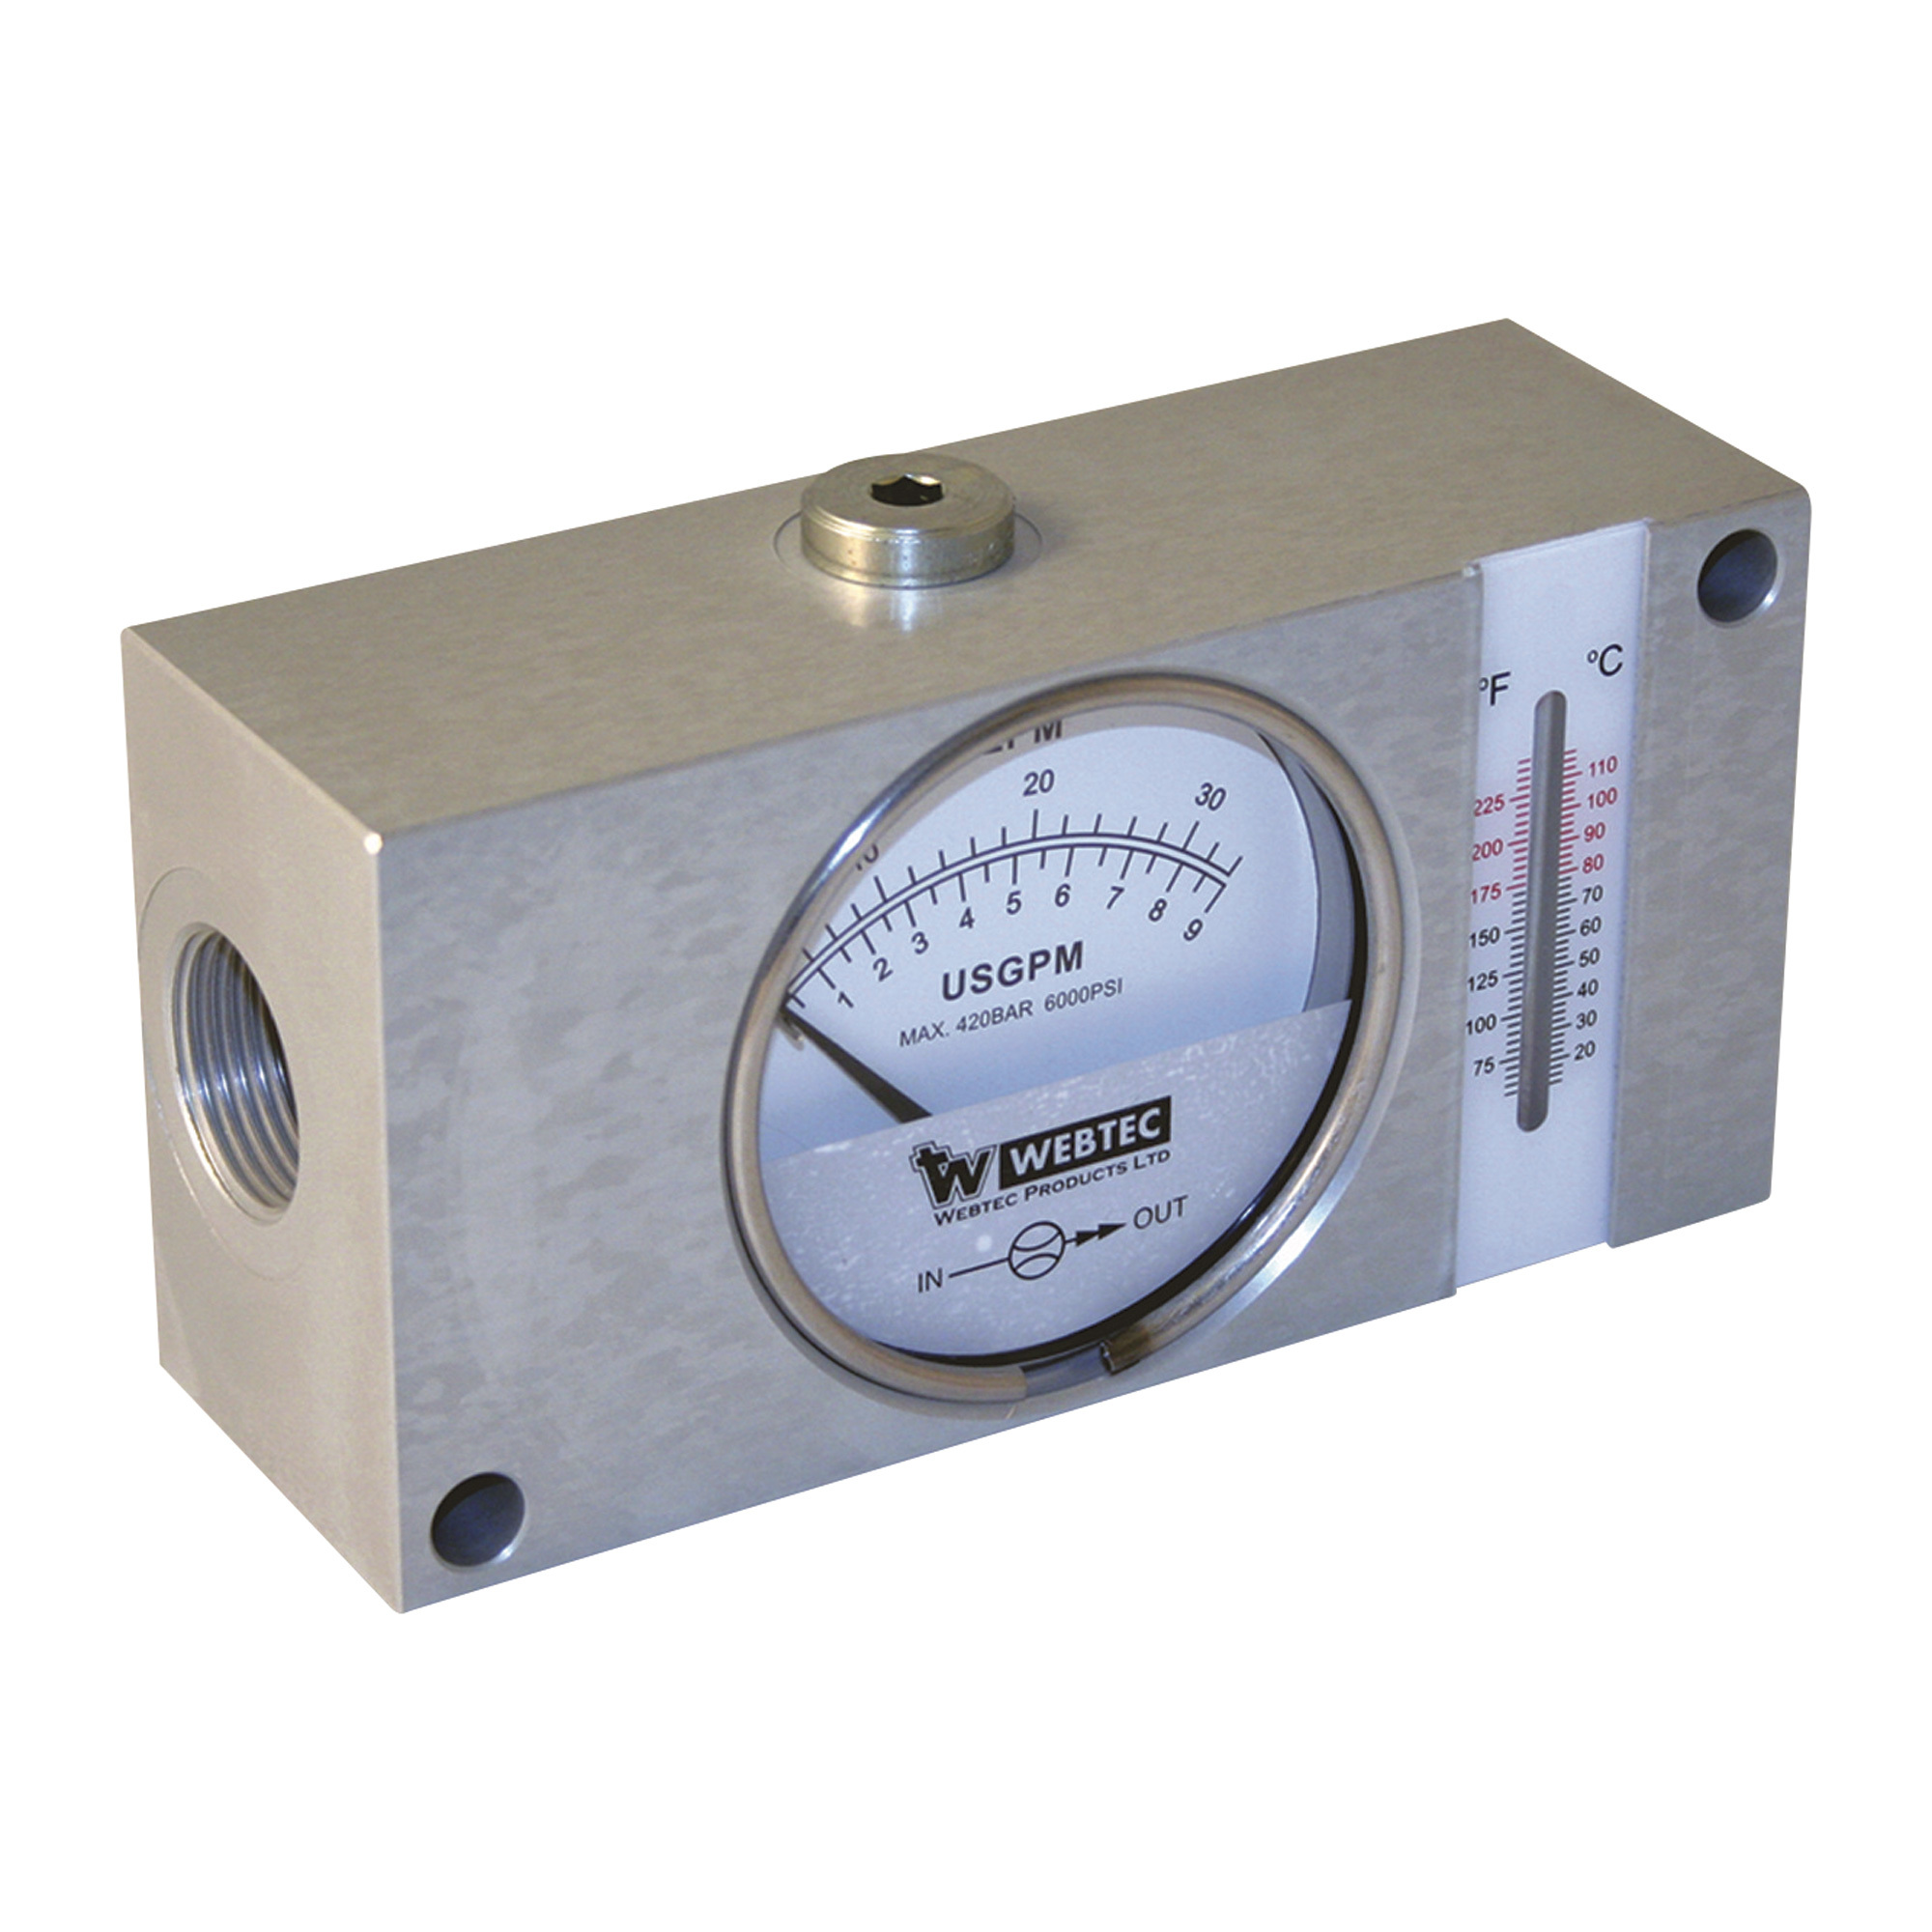 Webtec Flow Meter with Thermometer